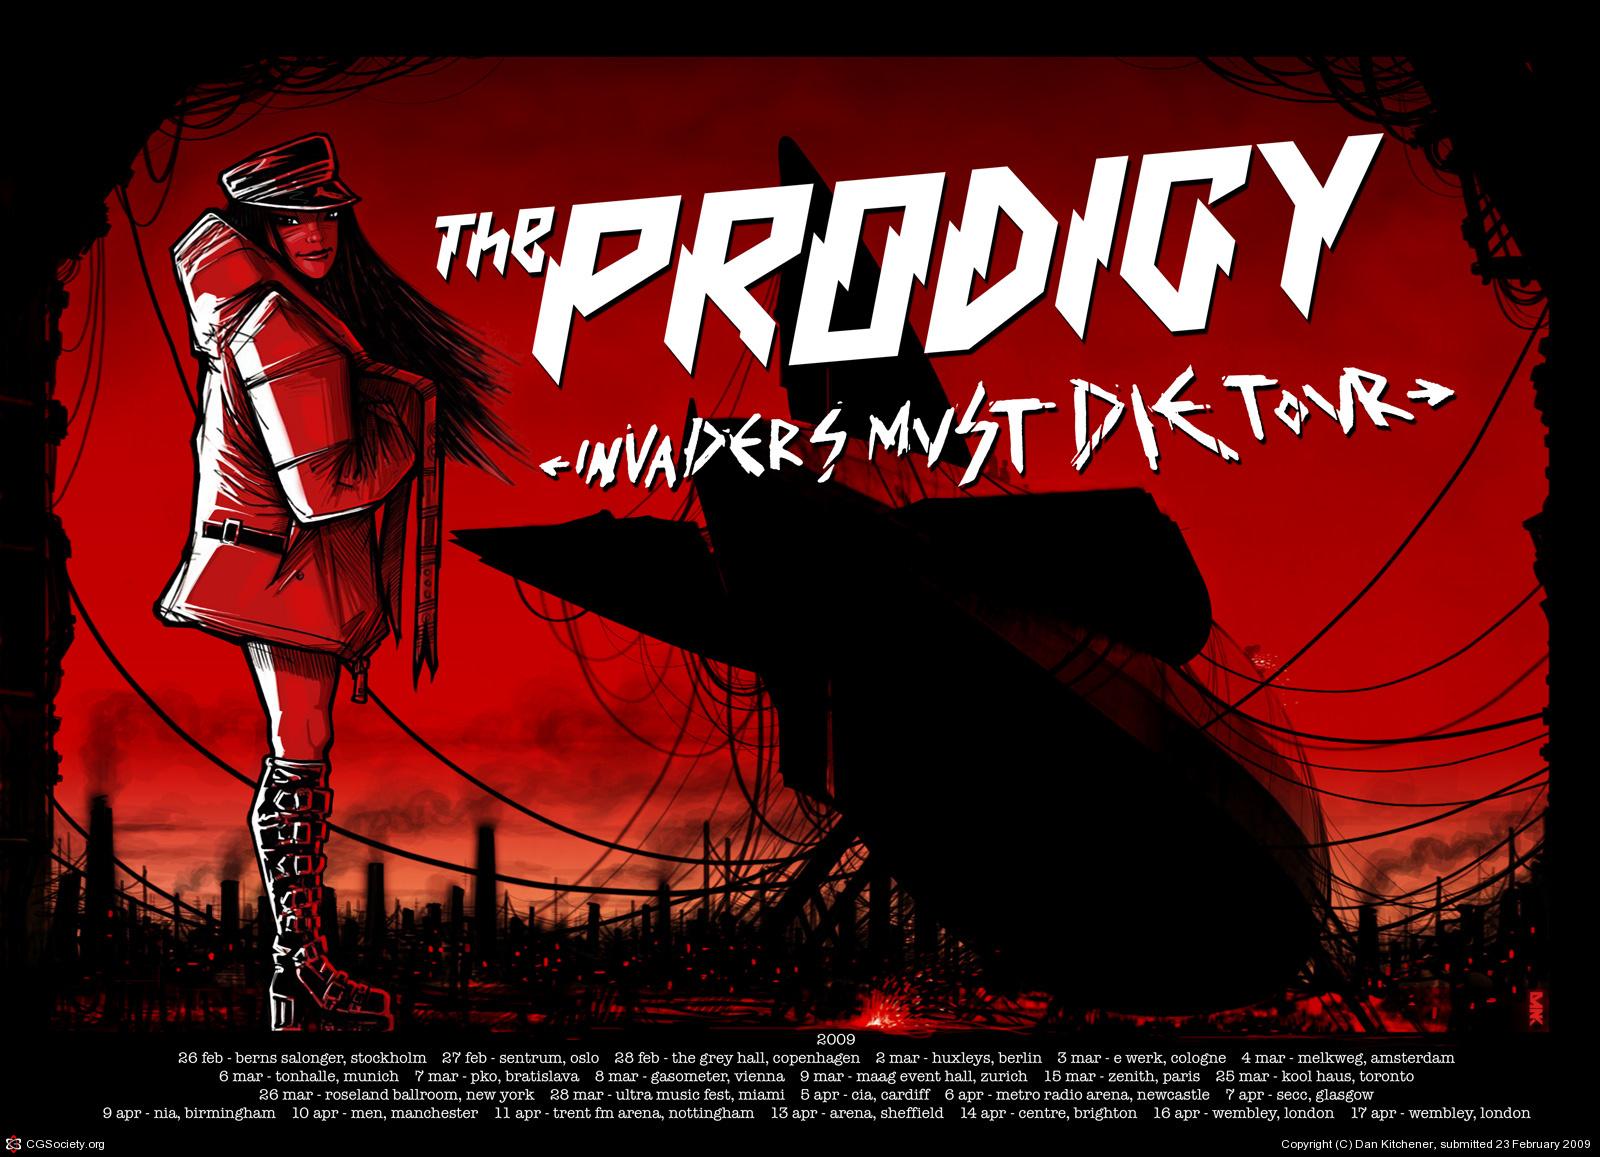 The Prodigy Wallpaper. The Prodigy Fanboy Howlett Keith